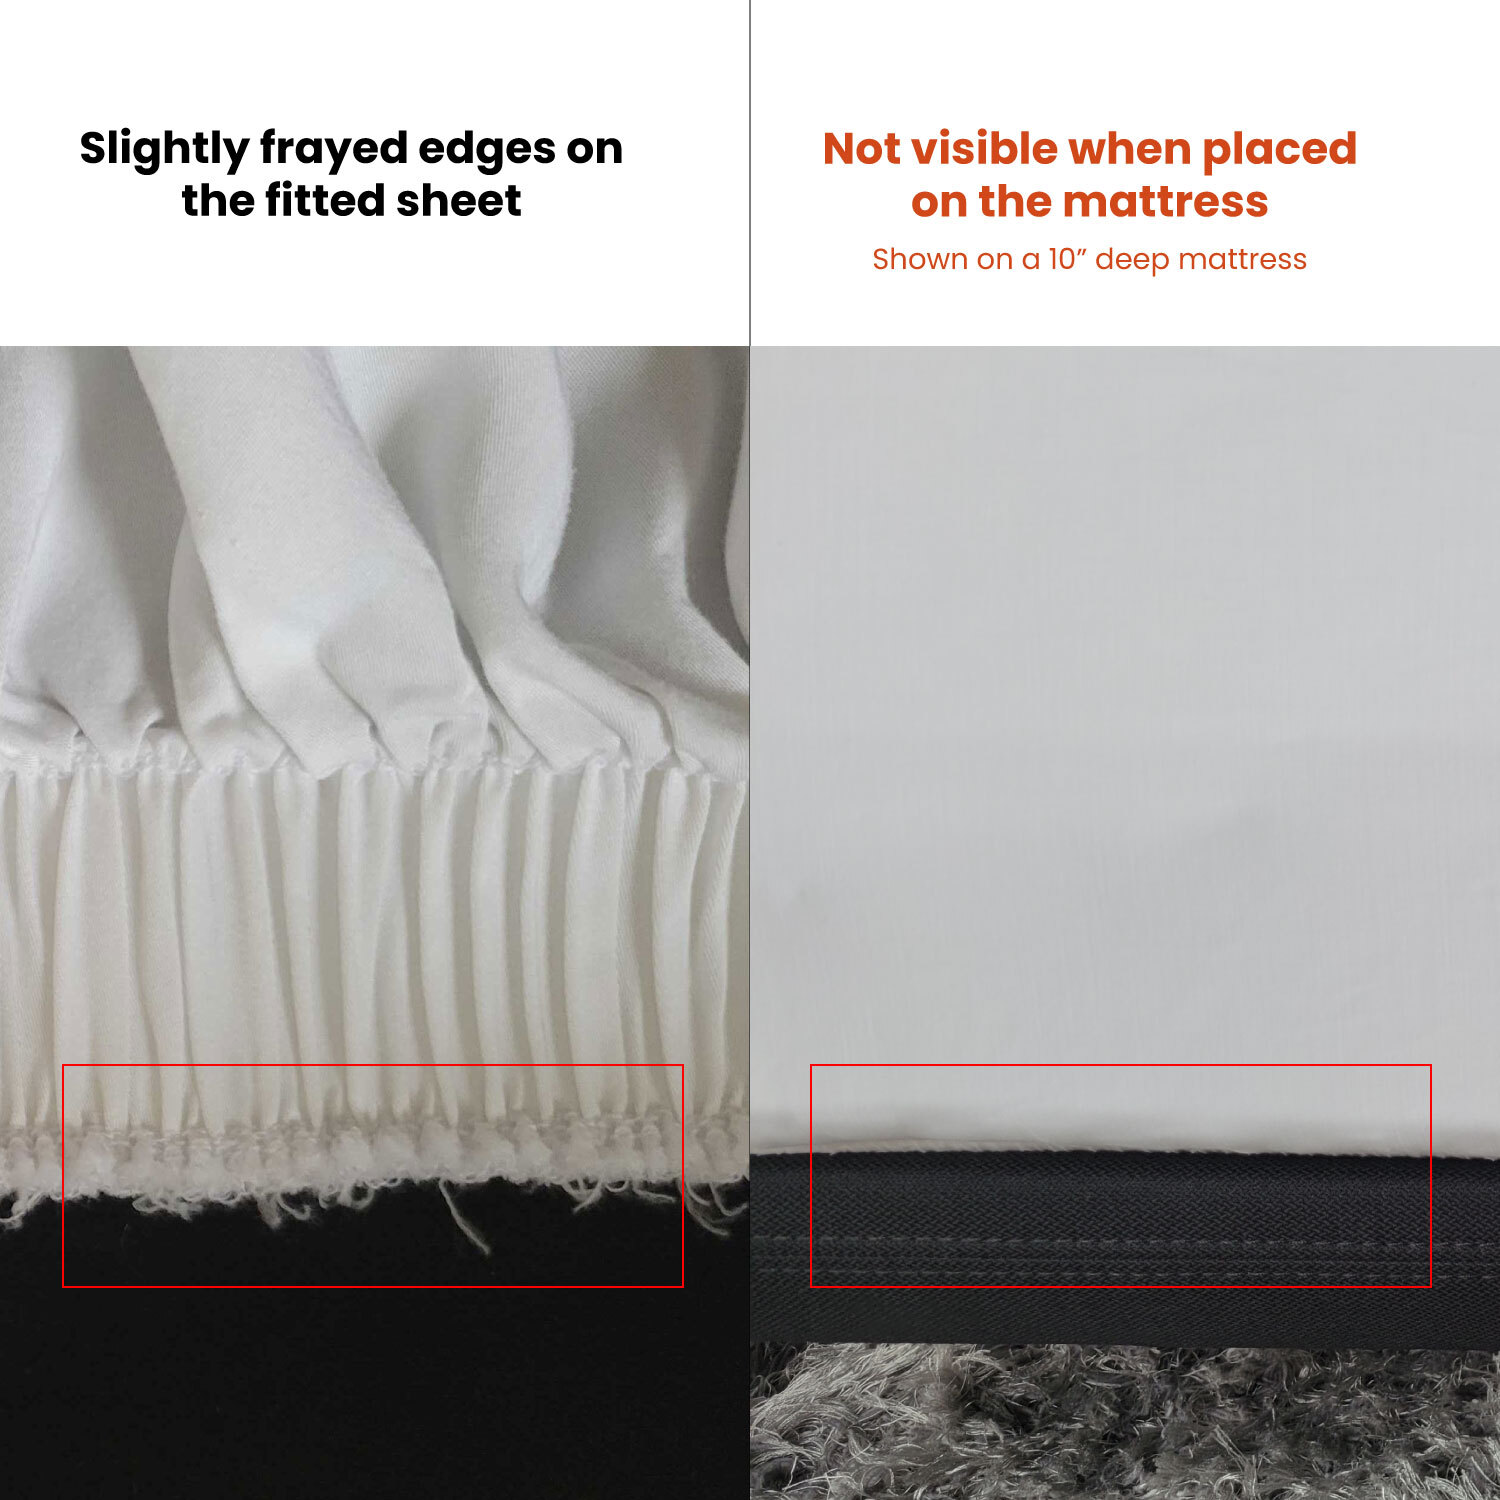 image showing two sheets one has frayed edges and the other is wirhout frayed edges.